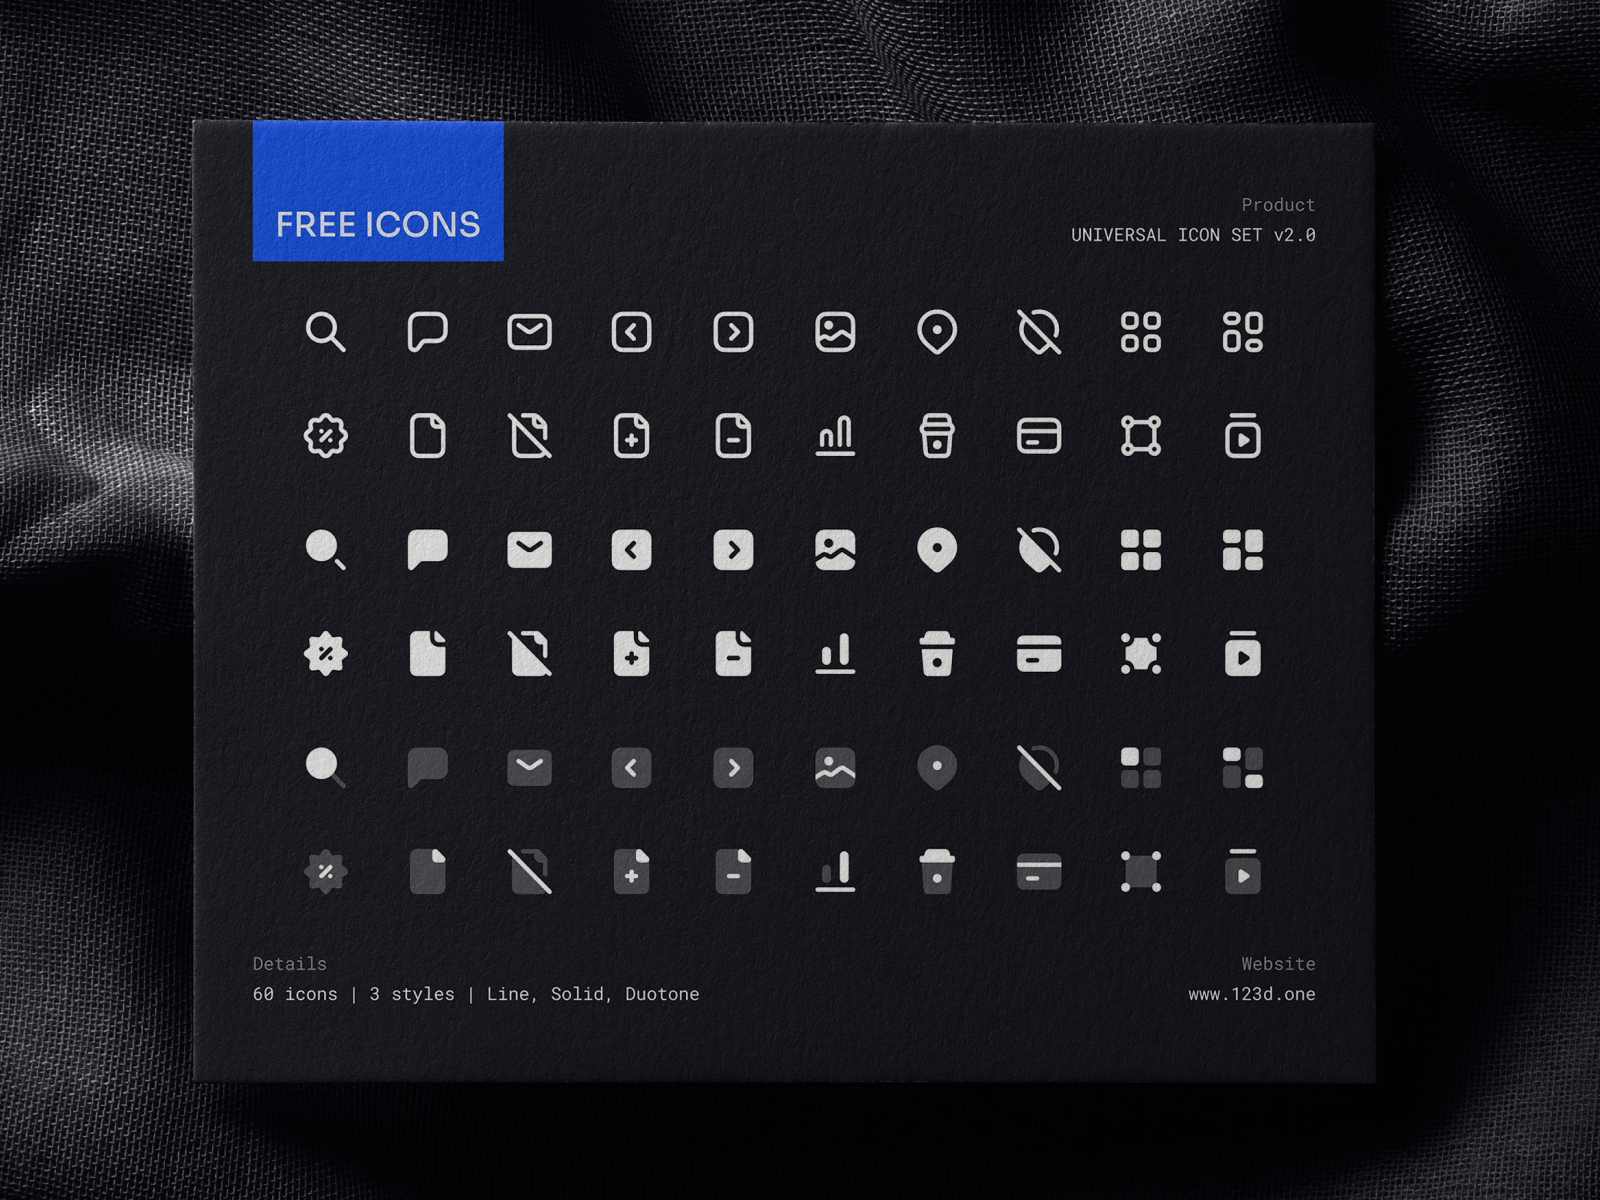 Universal Icon Set v2.0 - Preview 123done clean figma free freebie gluph icon icon design icon pack icon set icon system iconography icons iconset minimalism preview sample symbol universal icon set vector icons